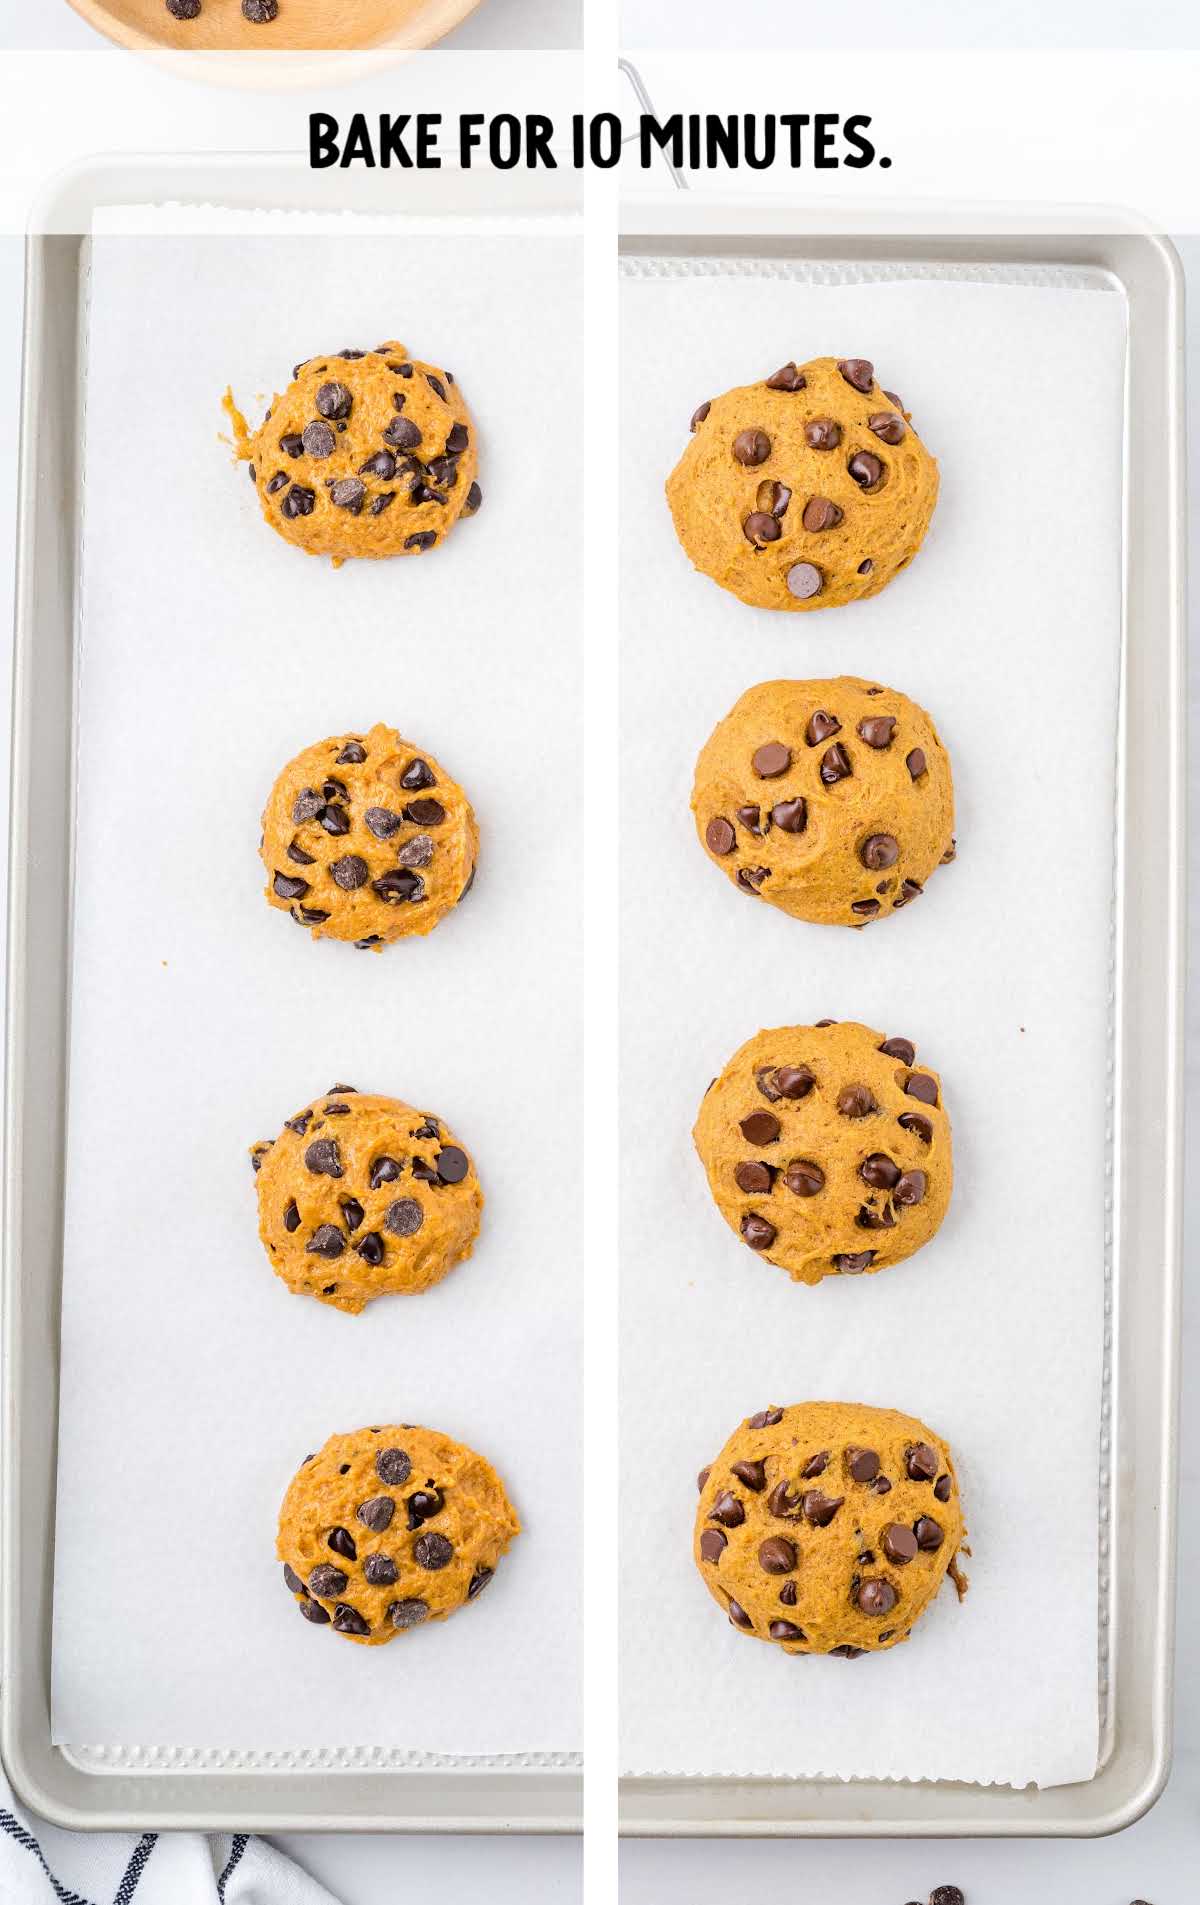 Pumpkin Chocolate Chip Cookies process shot of cookies being baked on a baking tray